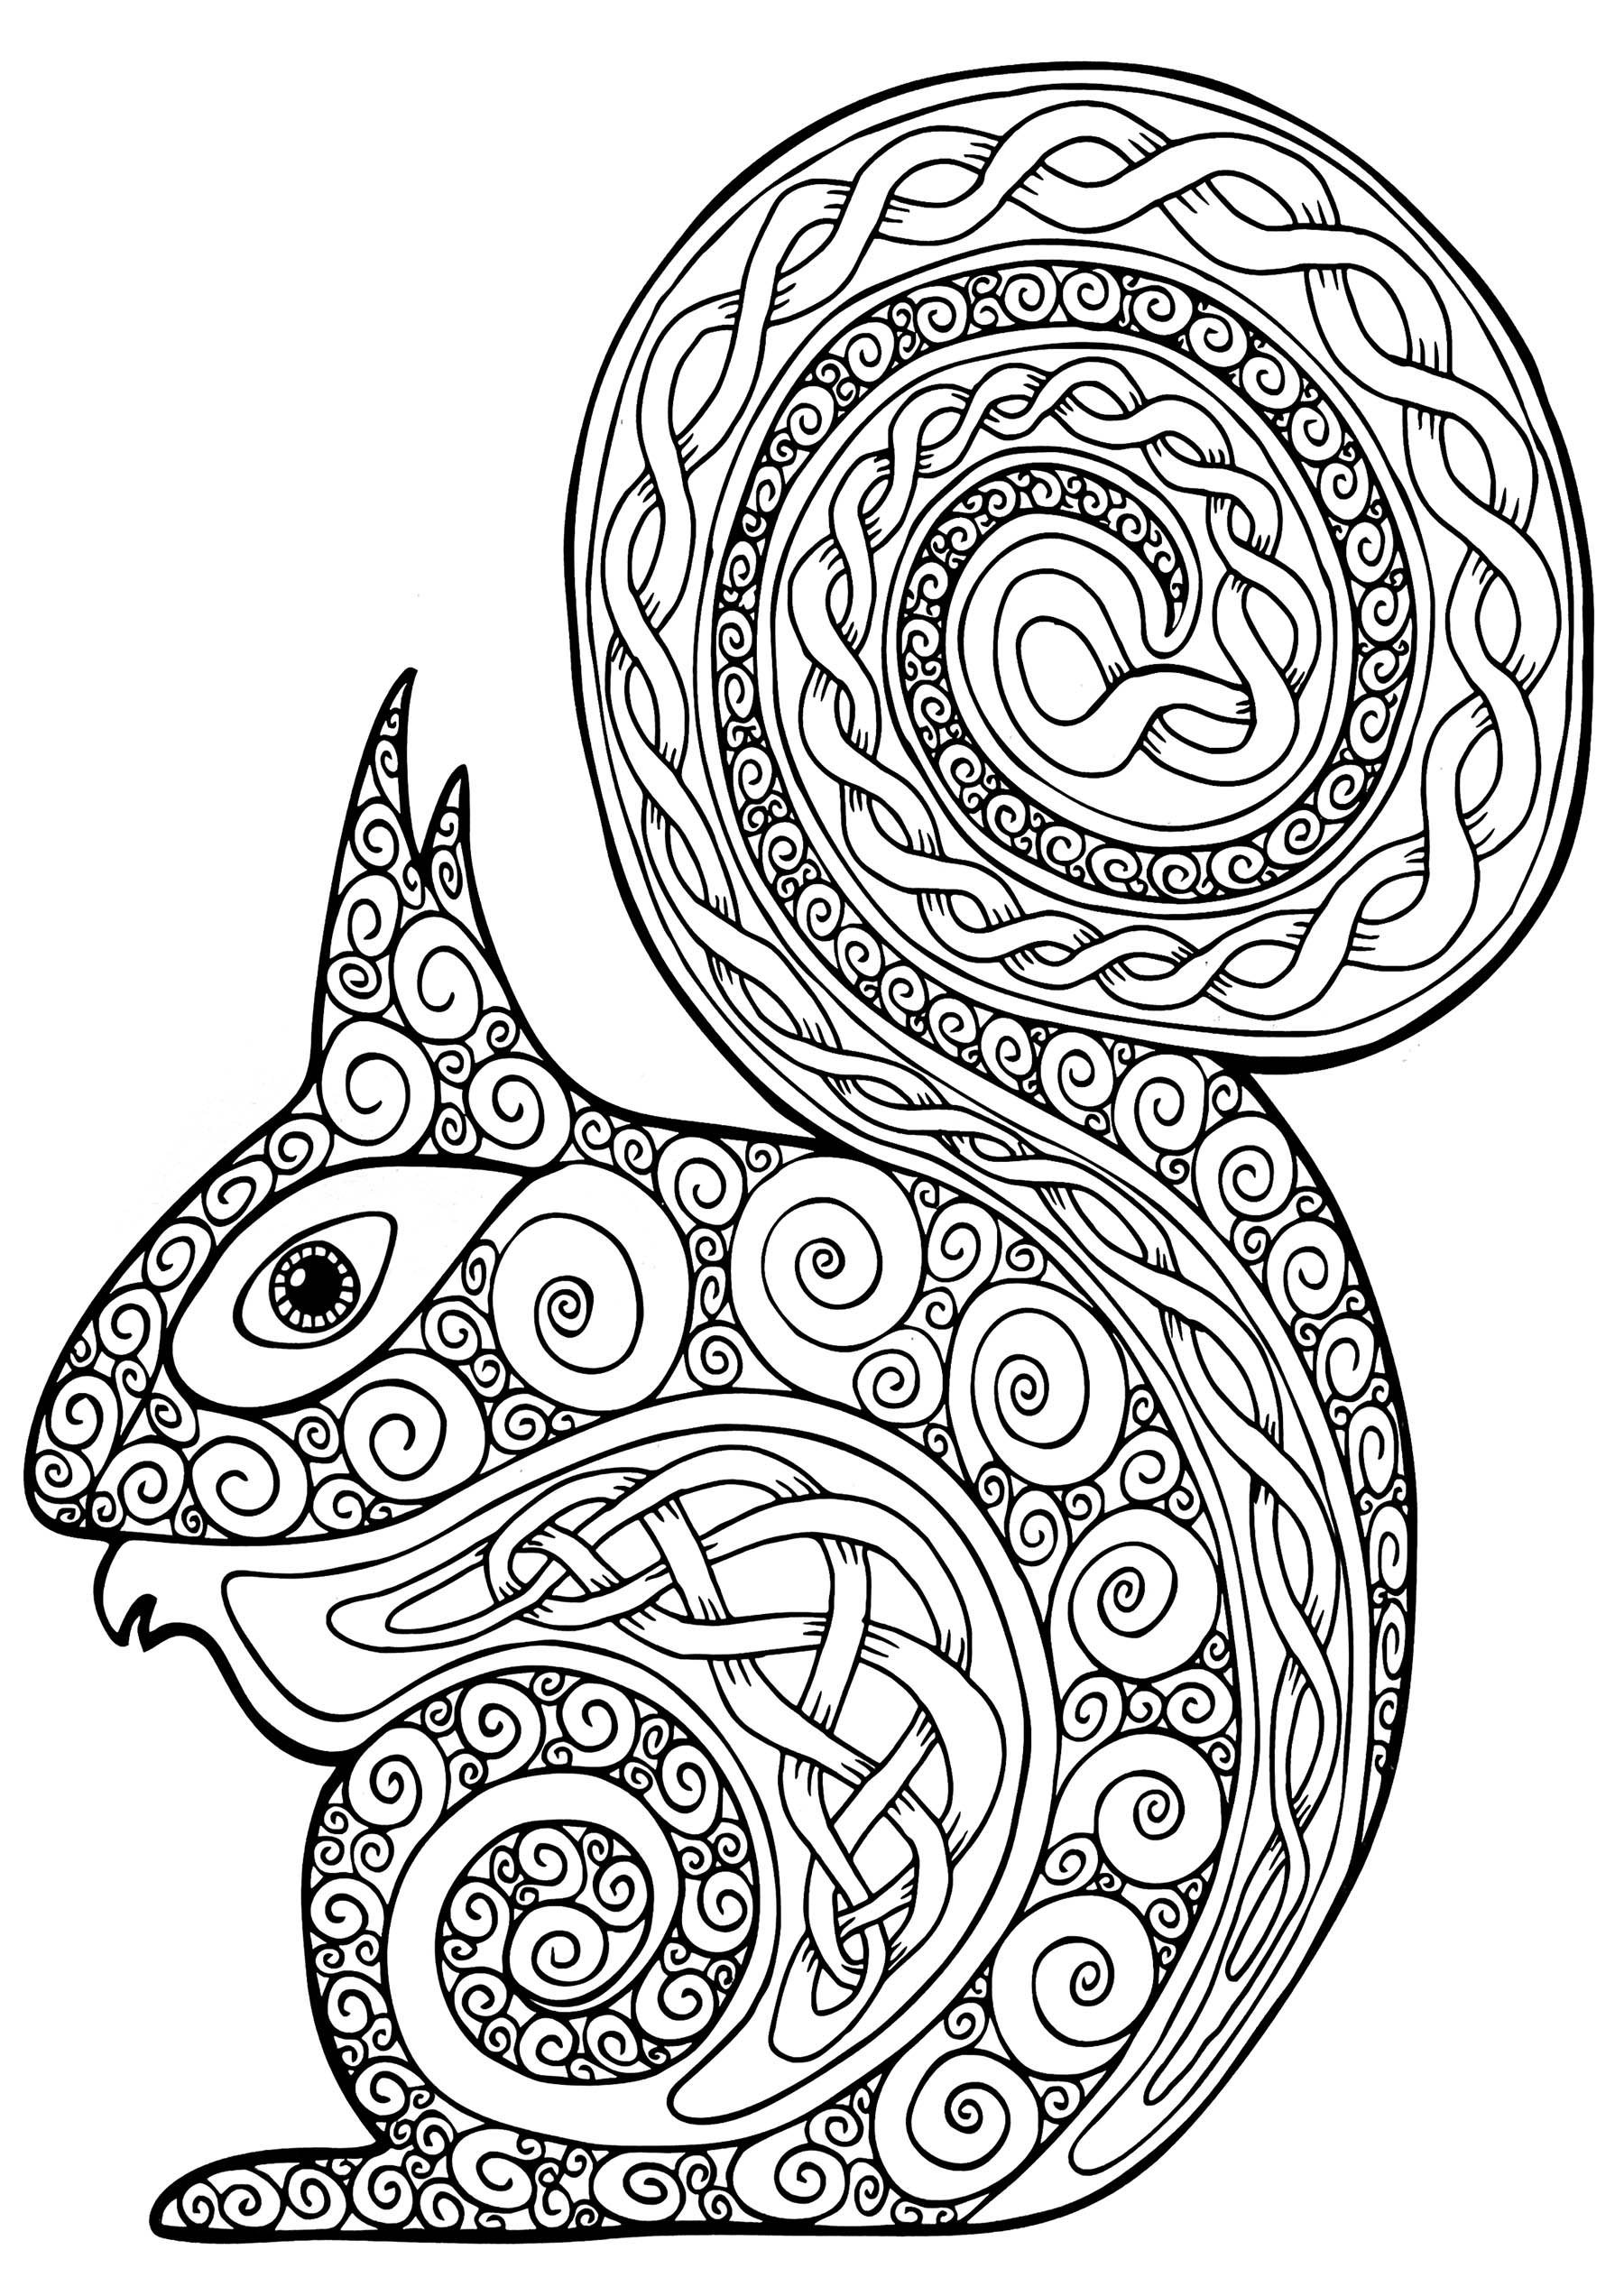 Squirrel full of various intertwined patterns, Artist : Art. Isabelle